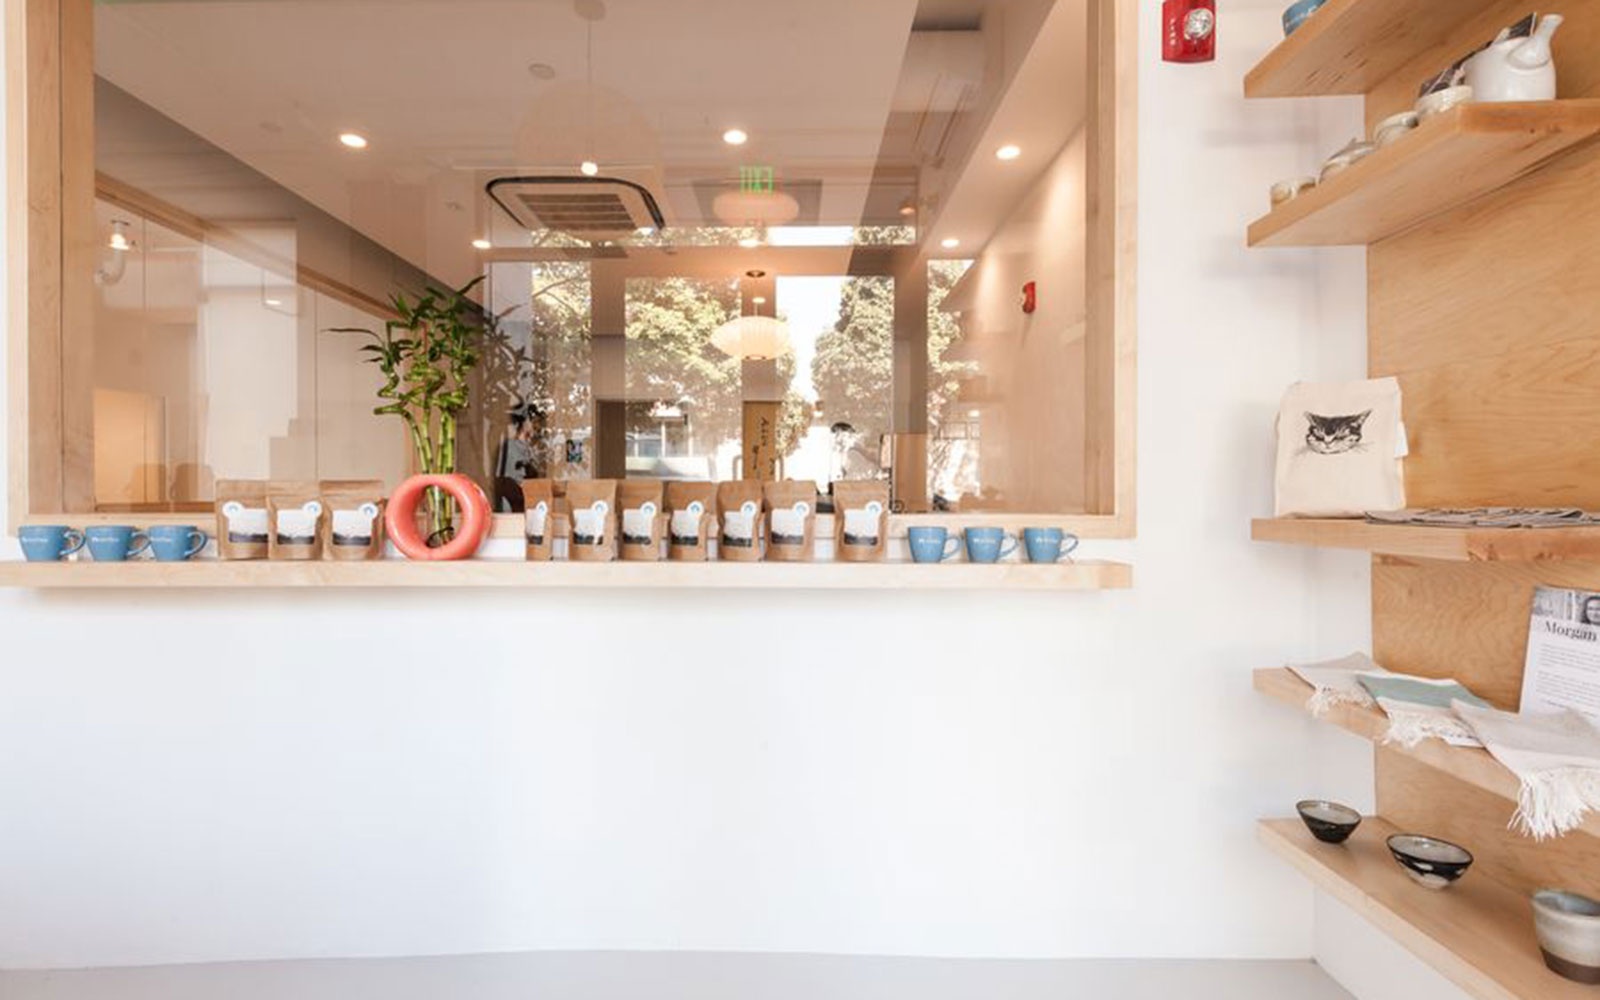 San Francisco Got Its First Cat Cafe—And It’s Surprisingly Posh